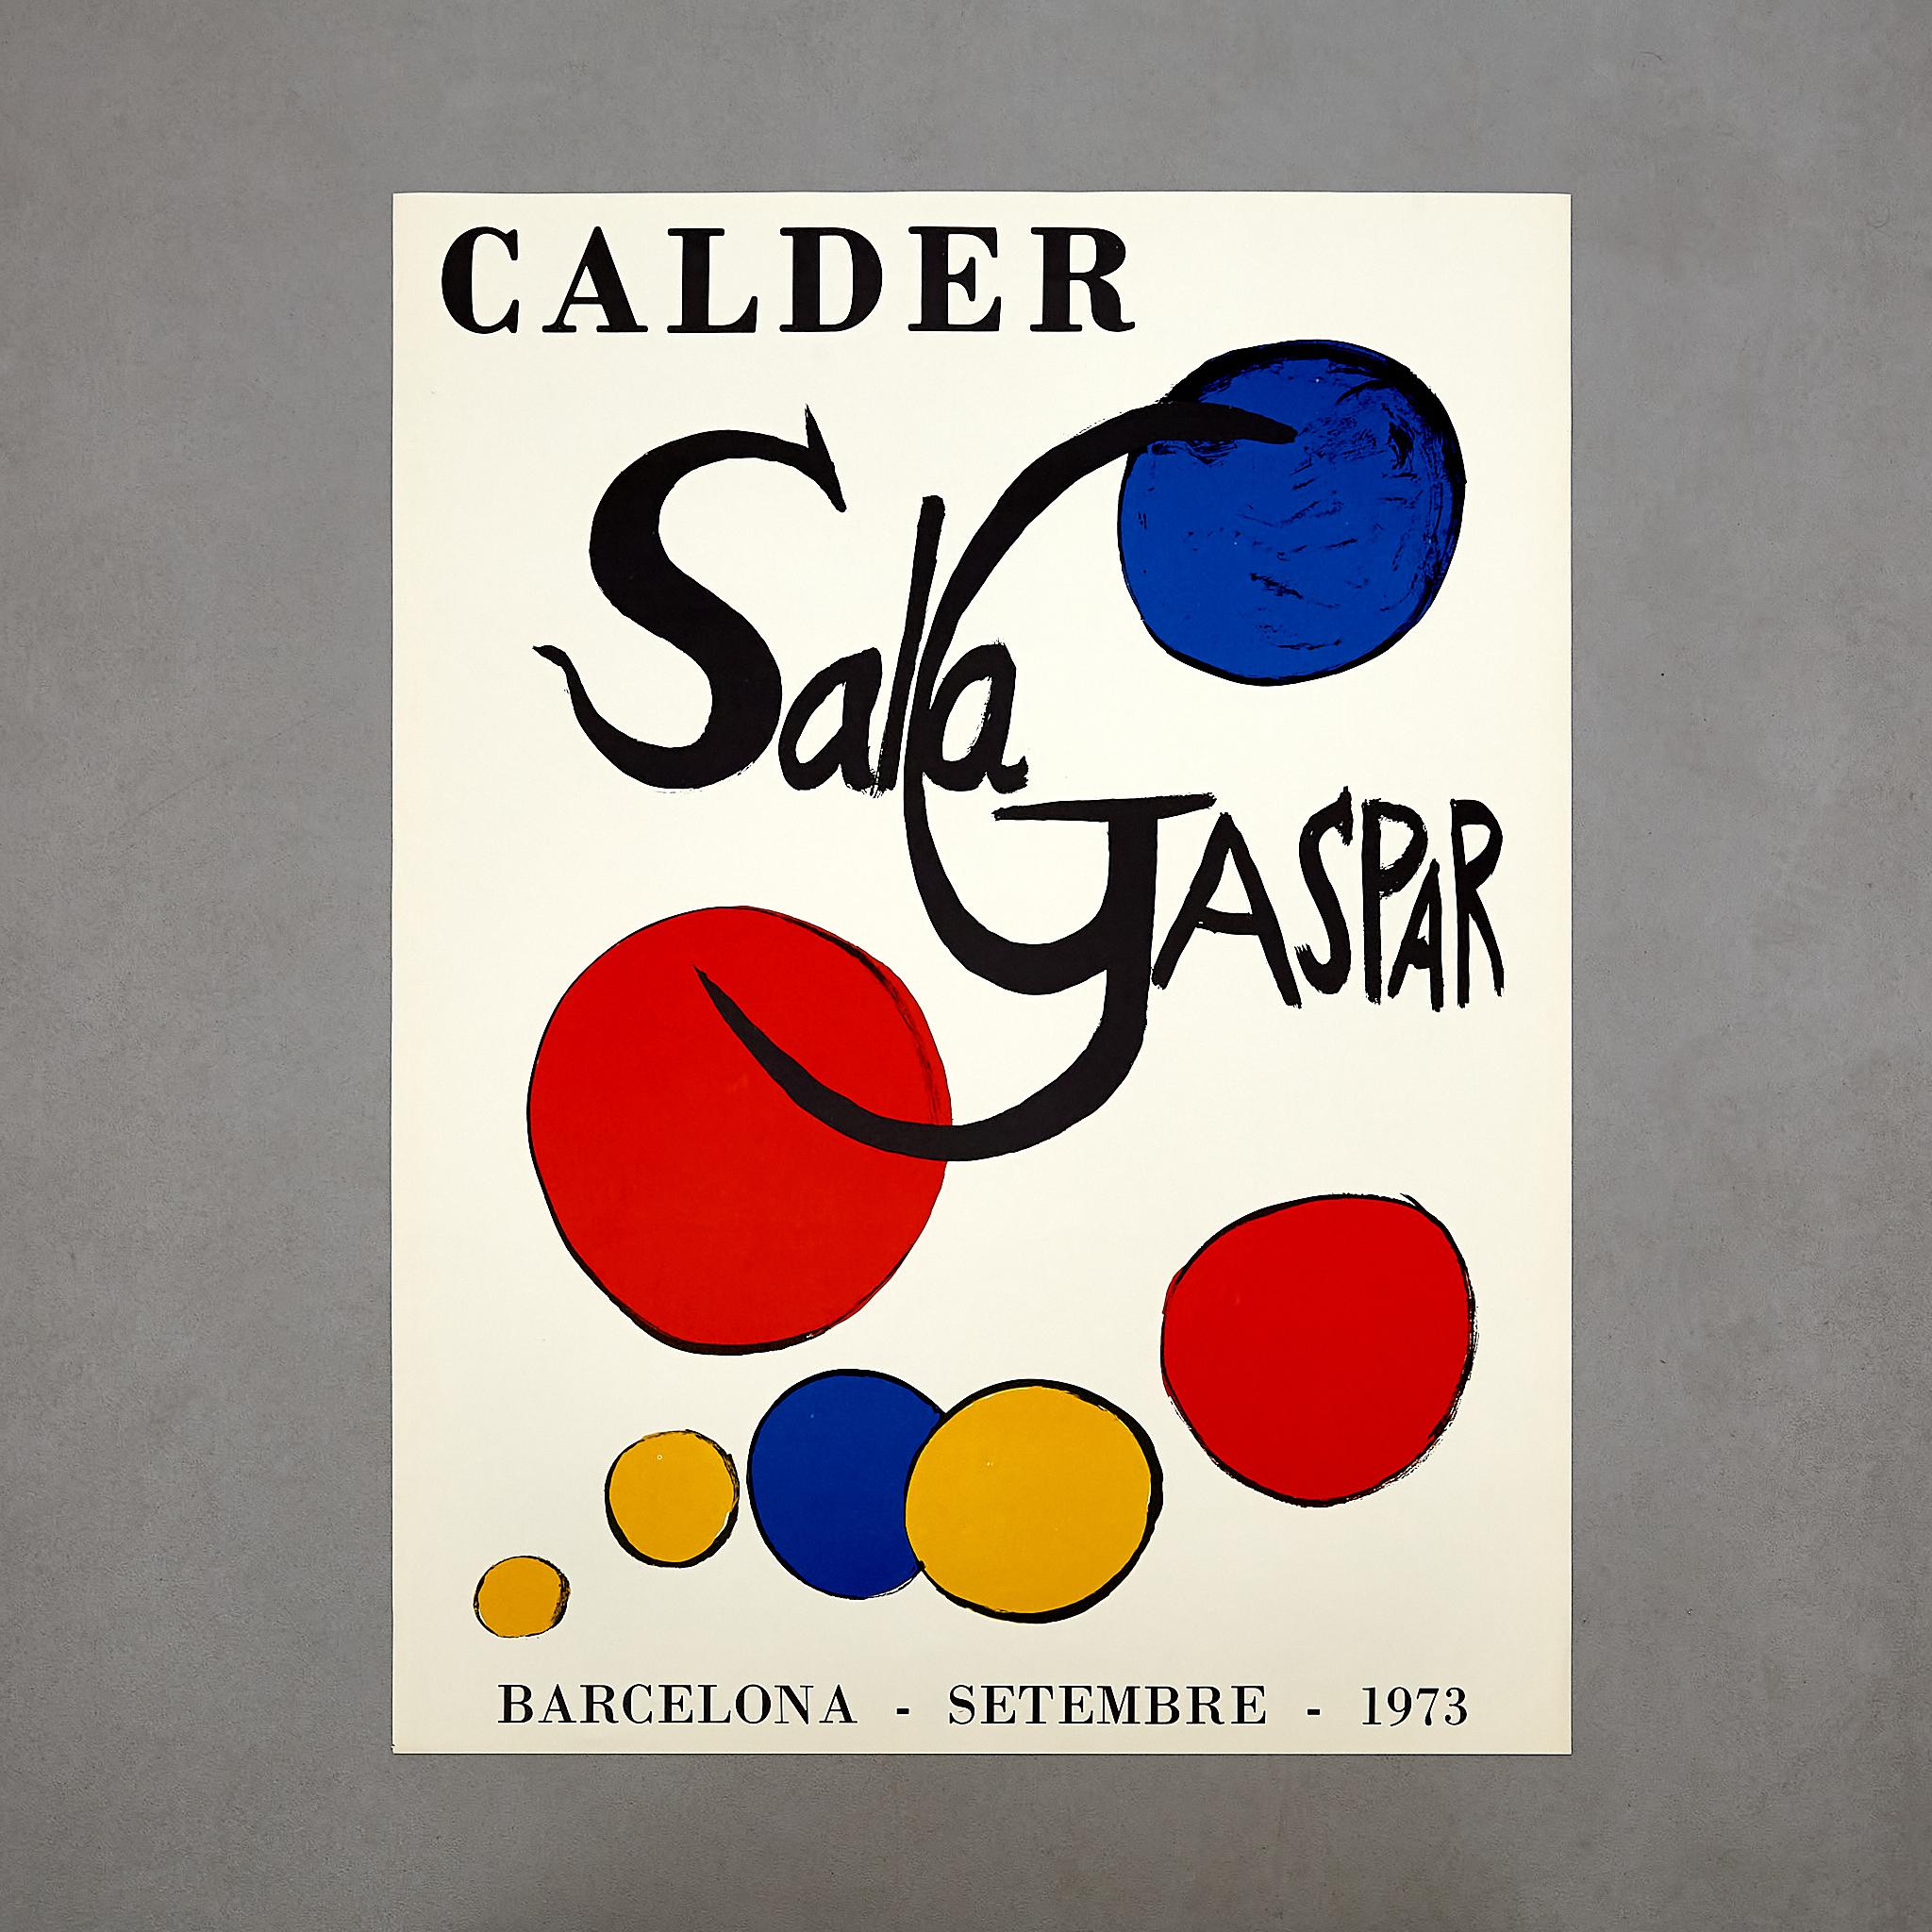 Step into a realm of artistic allure with this exceptional find - an original historical poster by Alexander Calder, prominently displayed at the renowned Sala Gaspar in Barcelona during the captivating September of 1973. Relish in the genius of